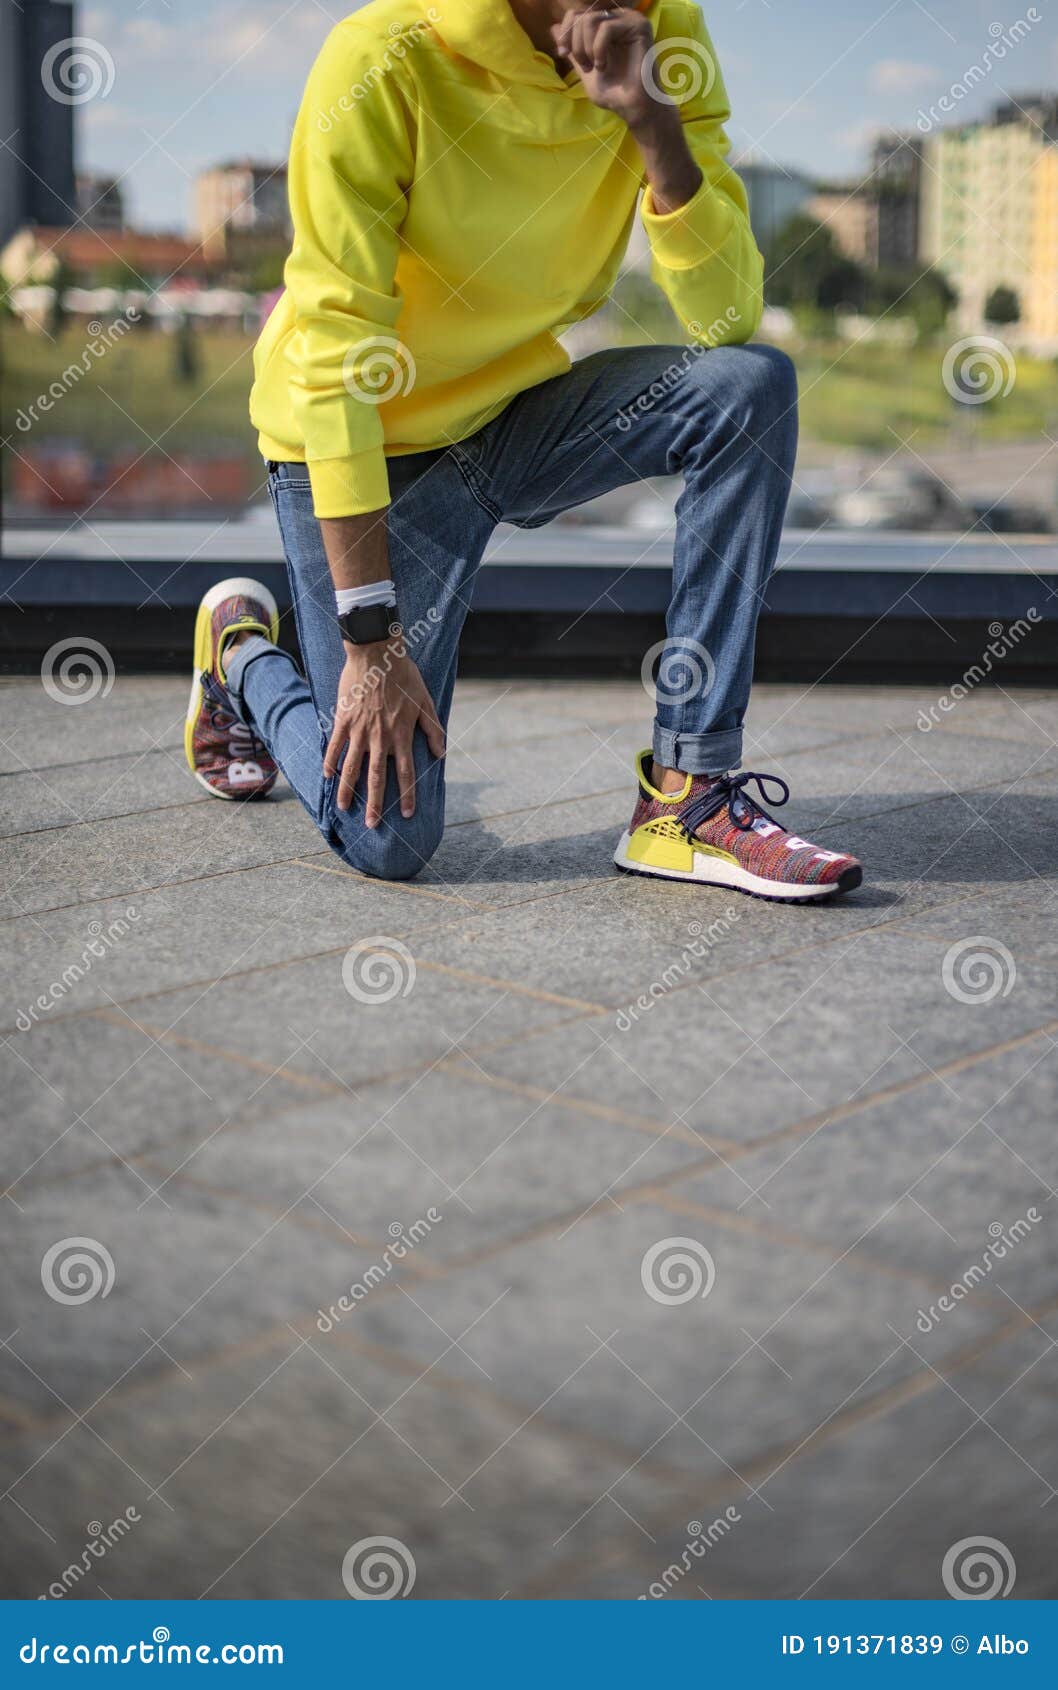 carbón Anciano Agacharse Pharrell Williams Human Race Body and Earth NMD by Adidas Editorial Stock  Image - Image of city, person: 191371839